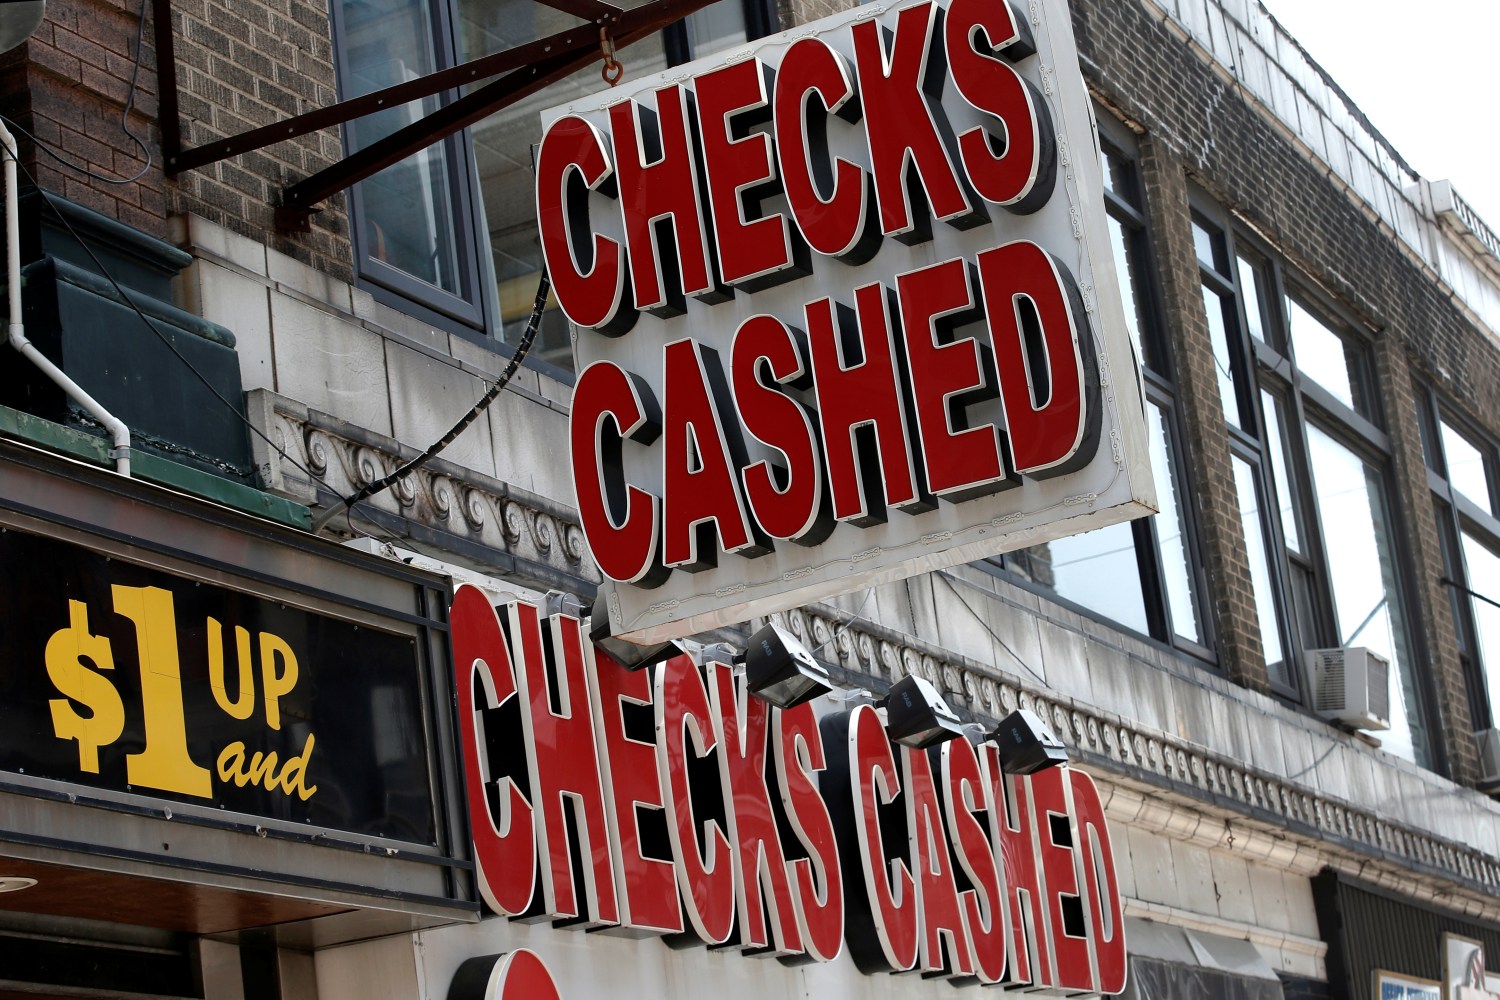 A sign is seen above a check cashing and loan shop in Jersey City.